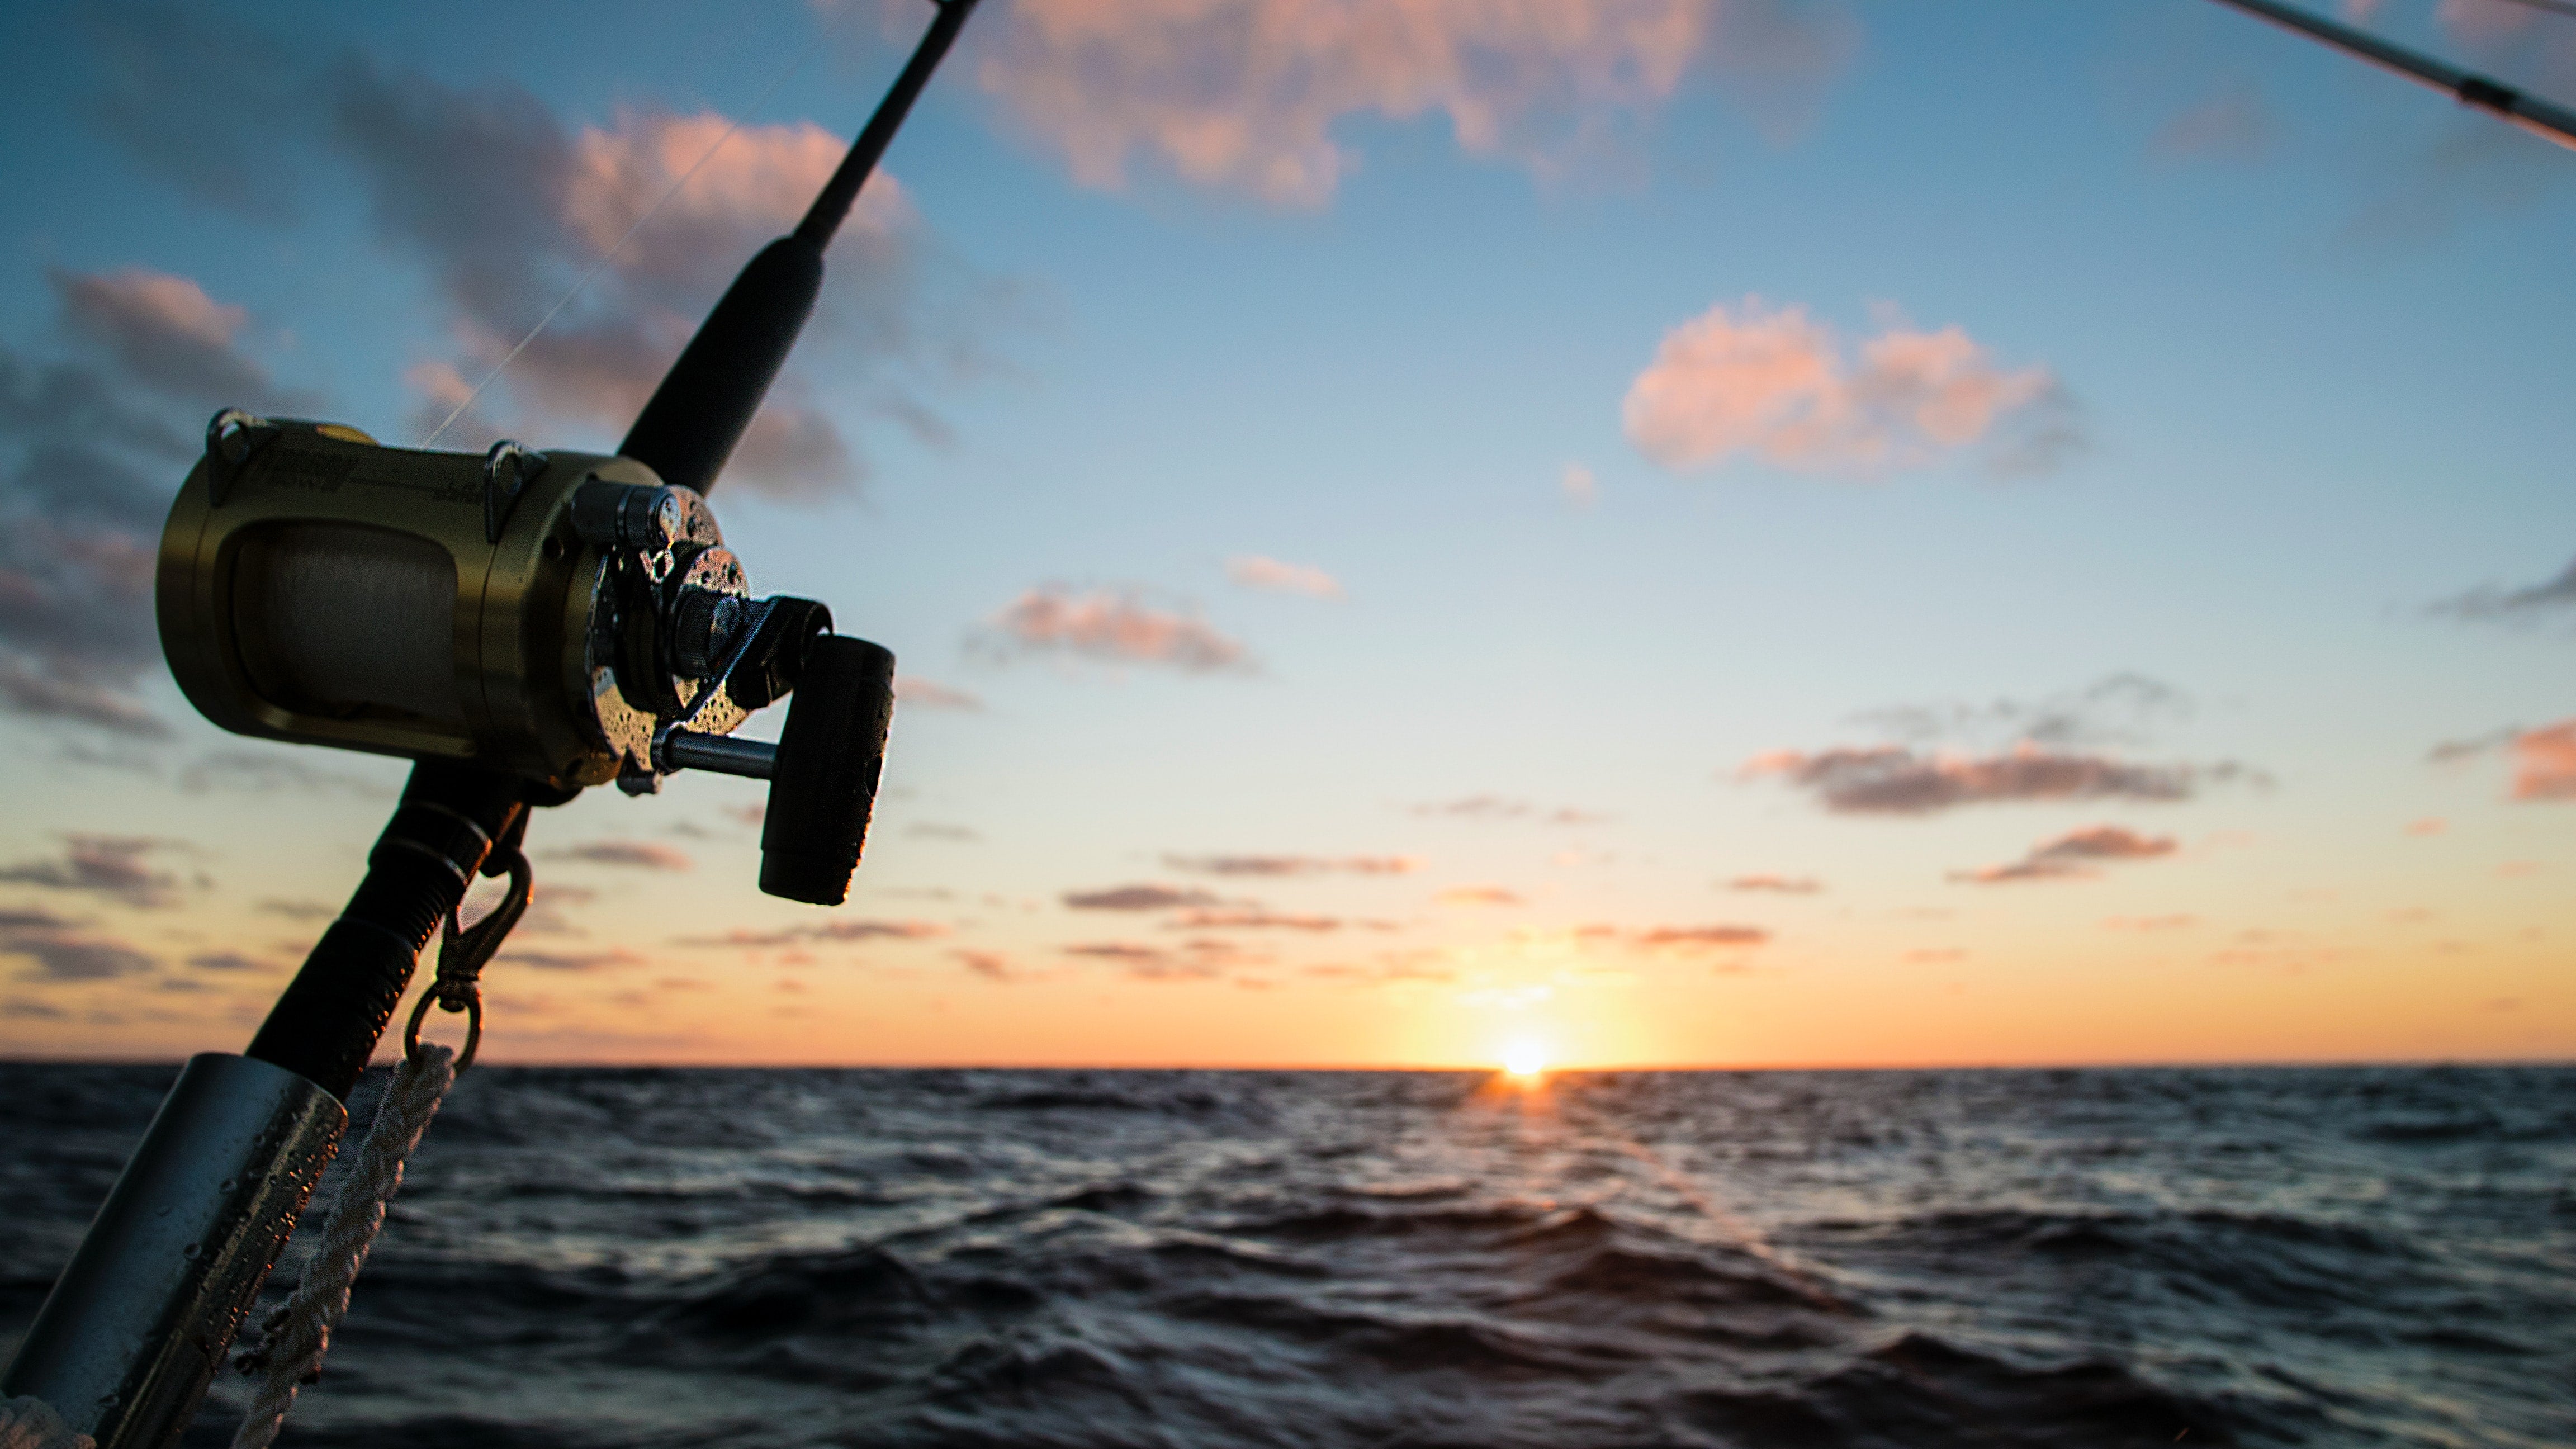 fishing rod in the sunset from missing at sea